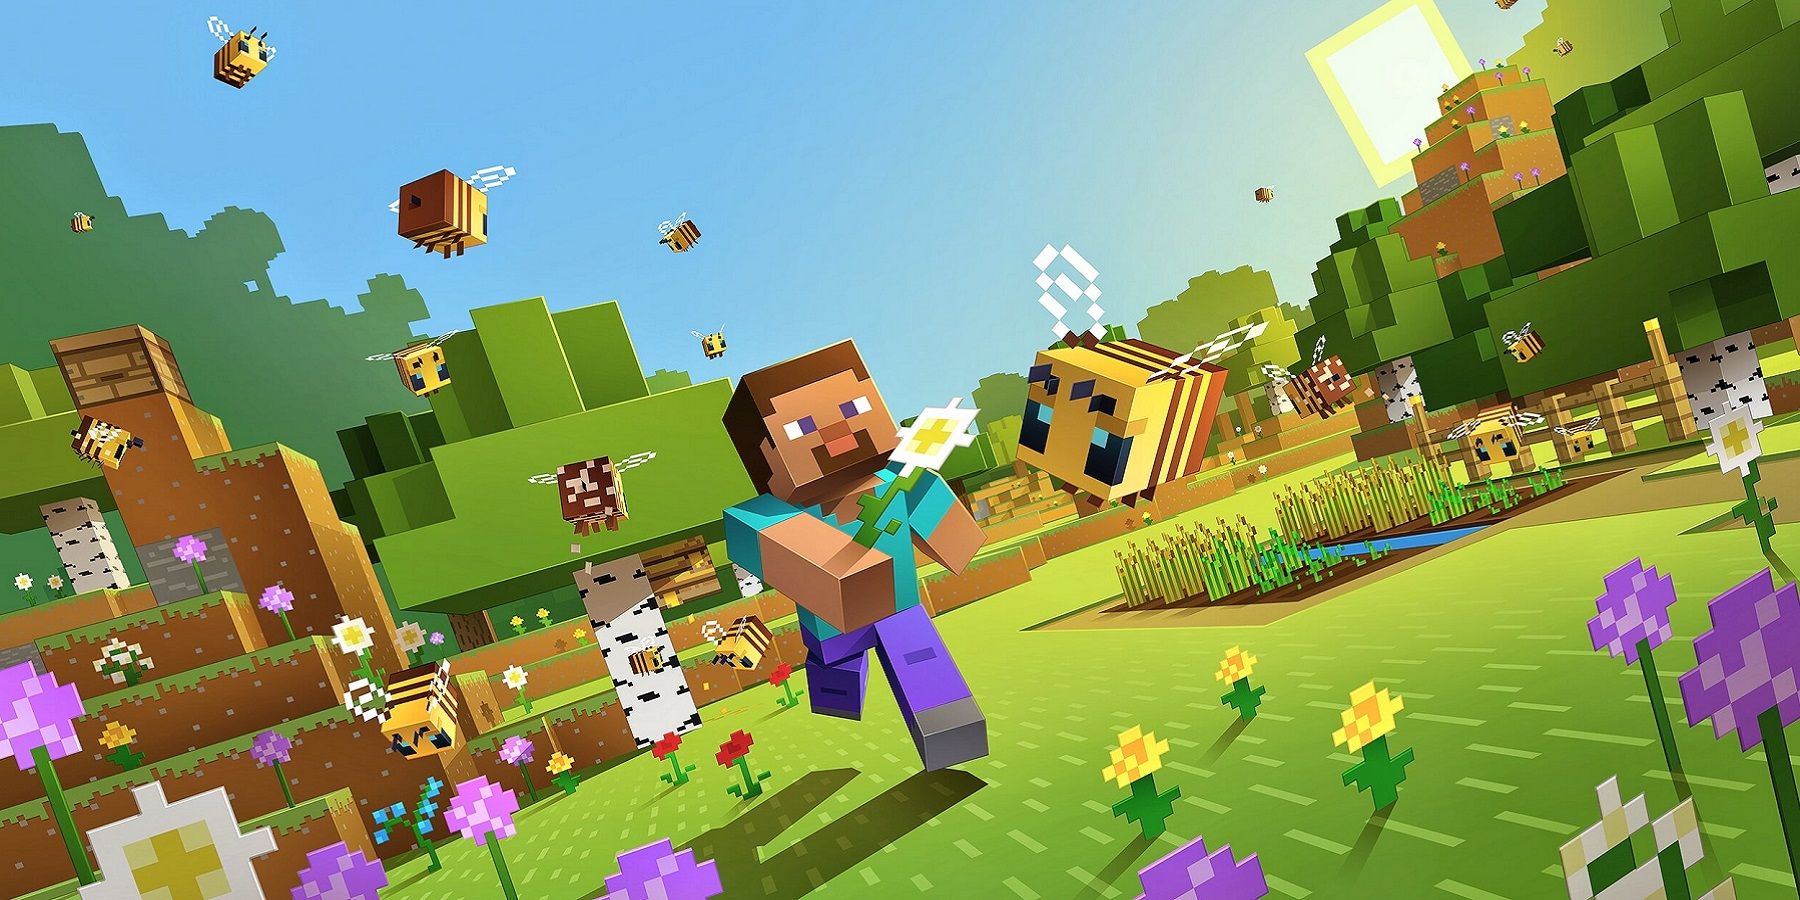 Image from Minecraft showing Steve running through a sunny bit of nature.